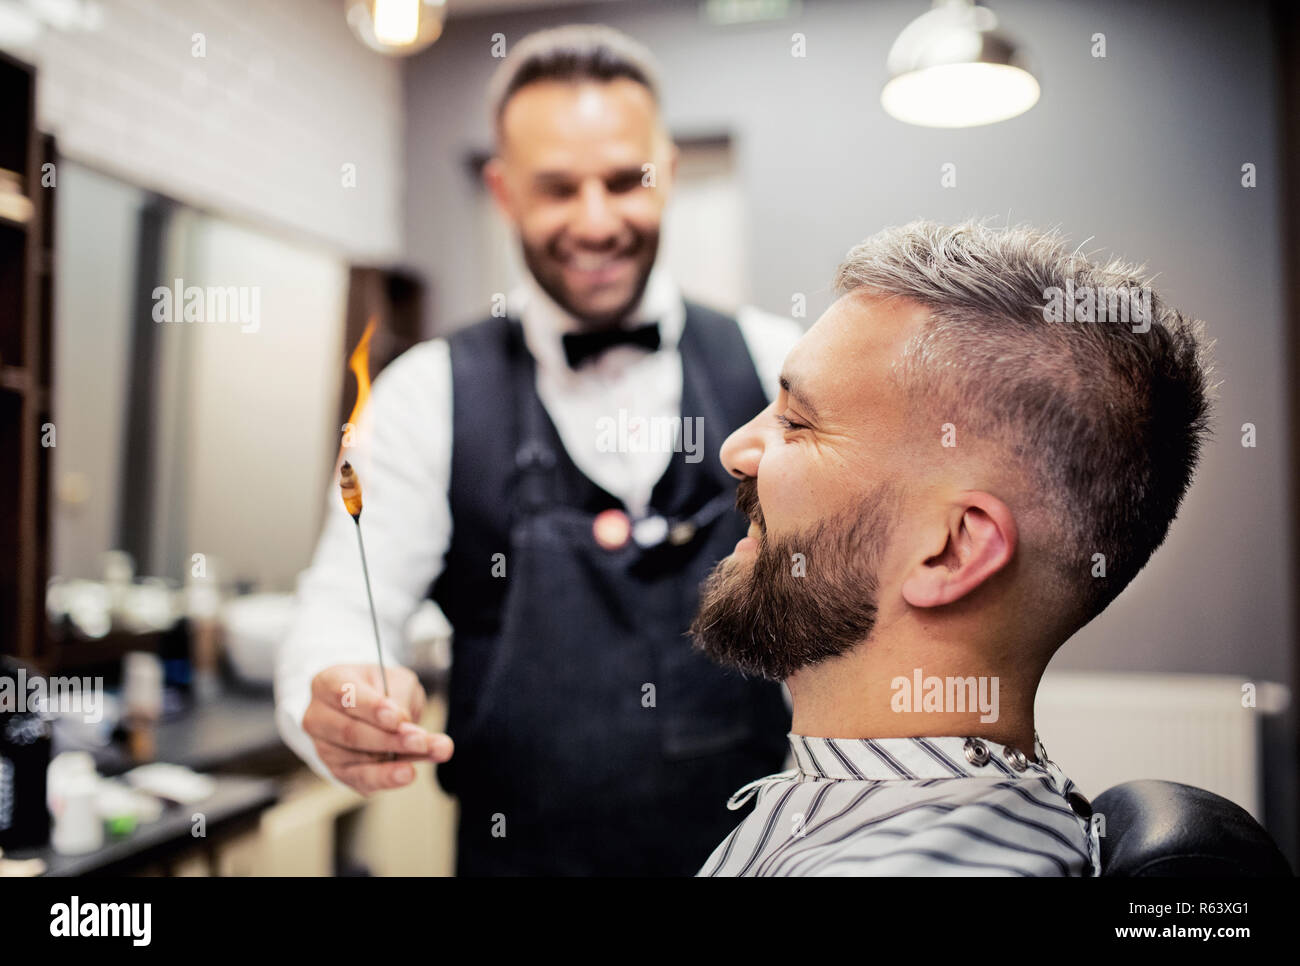 Hipster man client visiting haidresser and hairstylist in barber shop, ear hair removal. Stock Photo